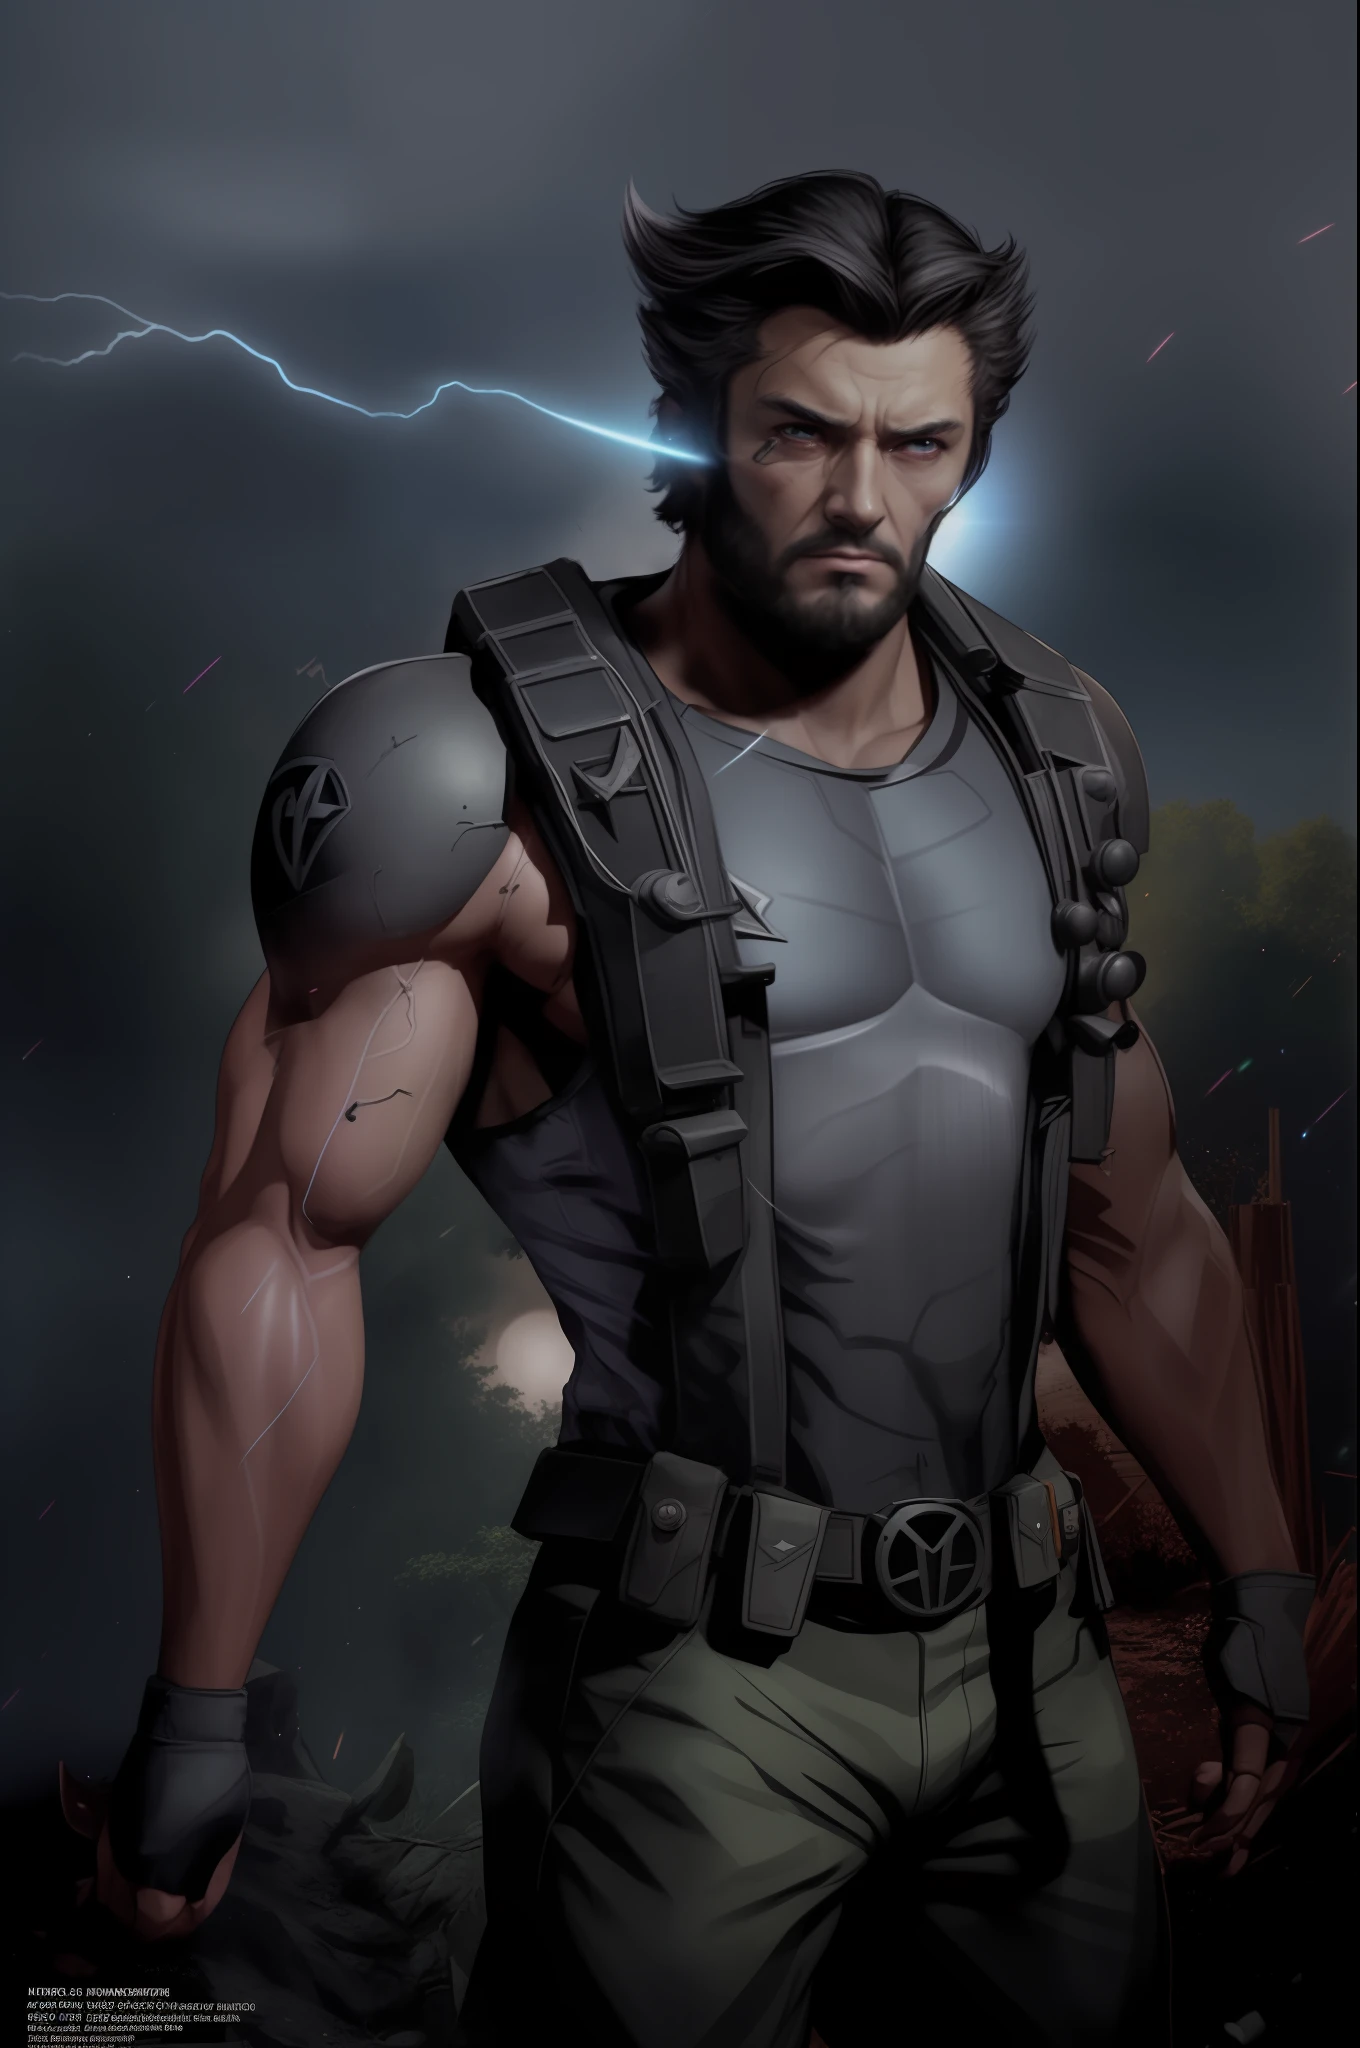 homem fitness, wolverine, Barba wolverine, marvel wolverine, man with wolverine claws,bodybuilder man, A city behind man, ((Chaotic combat scenario)), (((guerrilla))), lightning and thunder, lightnings, Fantastic, fancy,image ultra realistic, imagem HD, Full HD, Full definition, 真实感, Ultra realistic quality, fot,professional foto, 8K, cinematic lighthing, photographic, Eastman Kodak Color Negative film 5251 50T filmado em panavision super ps | | | | | . no arms, highy detailed, photorealistic portrait, Brilliant studio setting, natural lighting, Crisp quality and light reflections, unreal engine 5 quality render, lifelike face, natural body figure on instagram, full body shot shot, Spring Teleobjetiva, 50 millimeters,
Portrait of Indian village woman at a gathering in the forests of Himachal Pradesh, cinemactic, Photo Session, Shot on 25mm lens, Depth of field, Tilt Blur, shutter-speed 1/1000, F/22, White balance, 32k, Super-Resolution, By Photo RGB, half rear lighting, contra-luz, dramatic lighting, Incandescent, soft lighting, volumetric, Tale Day, global ilumination, Global Screen Space Illumination, Scattering, eyeshadows,  RISTY, twinkling, Lumen reflexes, screen space reflections, diffraction classification, chromatic aberration, GB Offset, Sweep Lines, ambient occlusion, antialiasing, FKAA, TXAA, RTX, SSAO, OpenGL Shaders, Post-processing, post - production, cell-shading, Tone-mapping, .....cgi, VFX, SFX, Insanely detailed and intricate, Hyper maximalist, chic, dinamic pose, fot, volumetric, ultra detali, details Intricate, super verbose, environment –uplight –v 4 –q 2